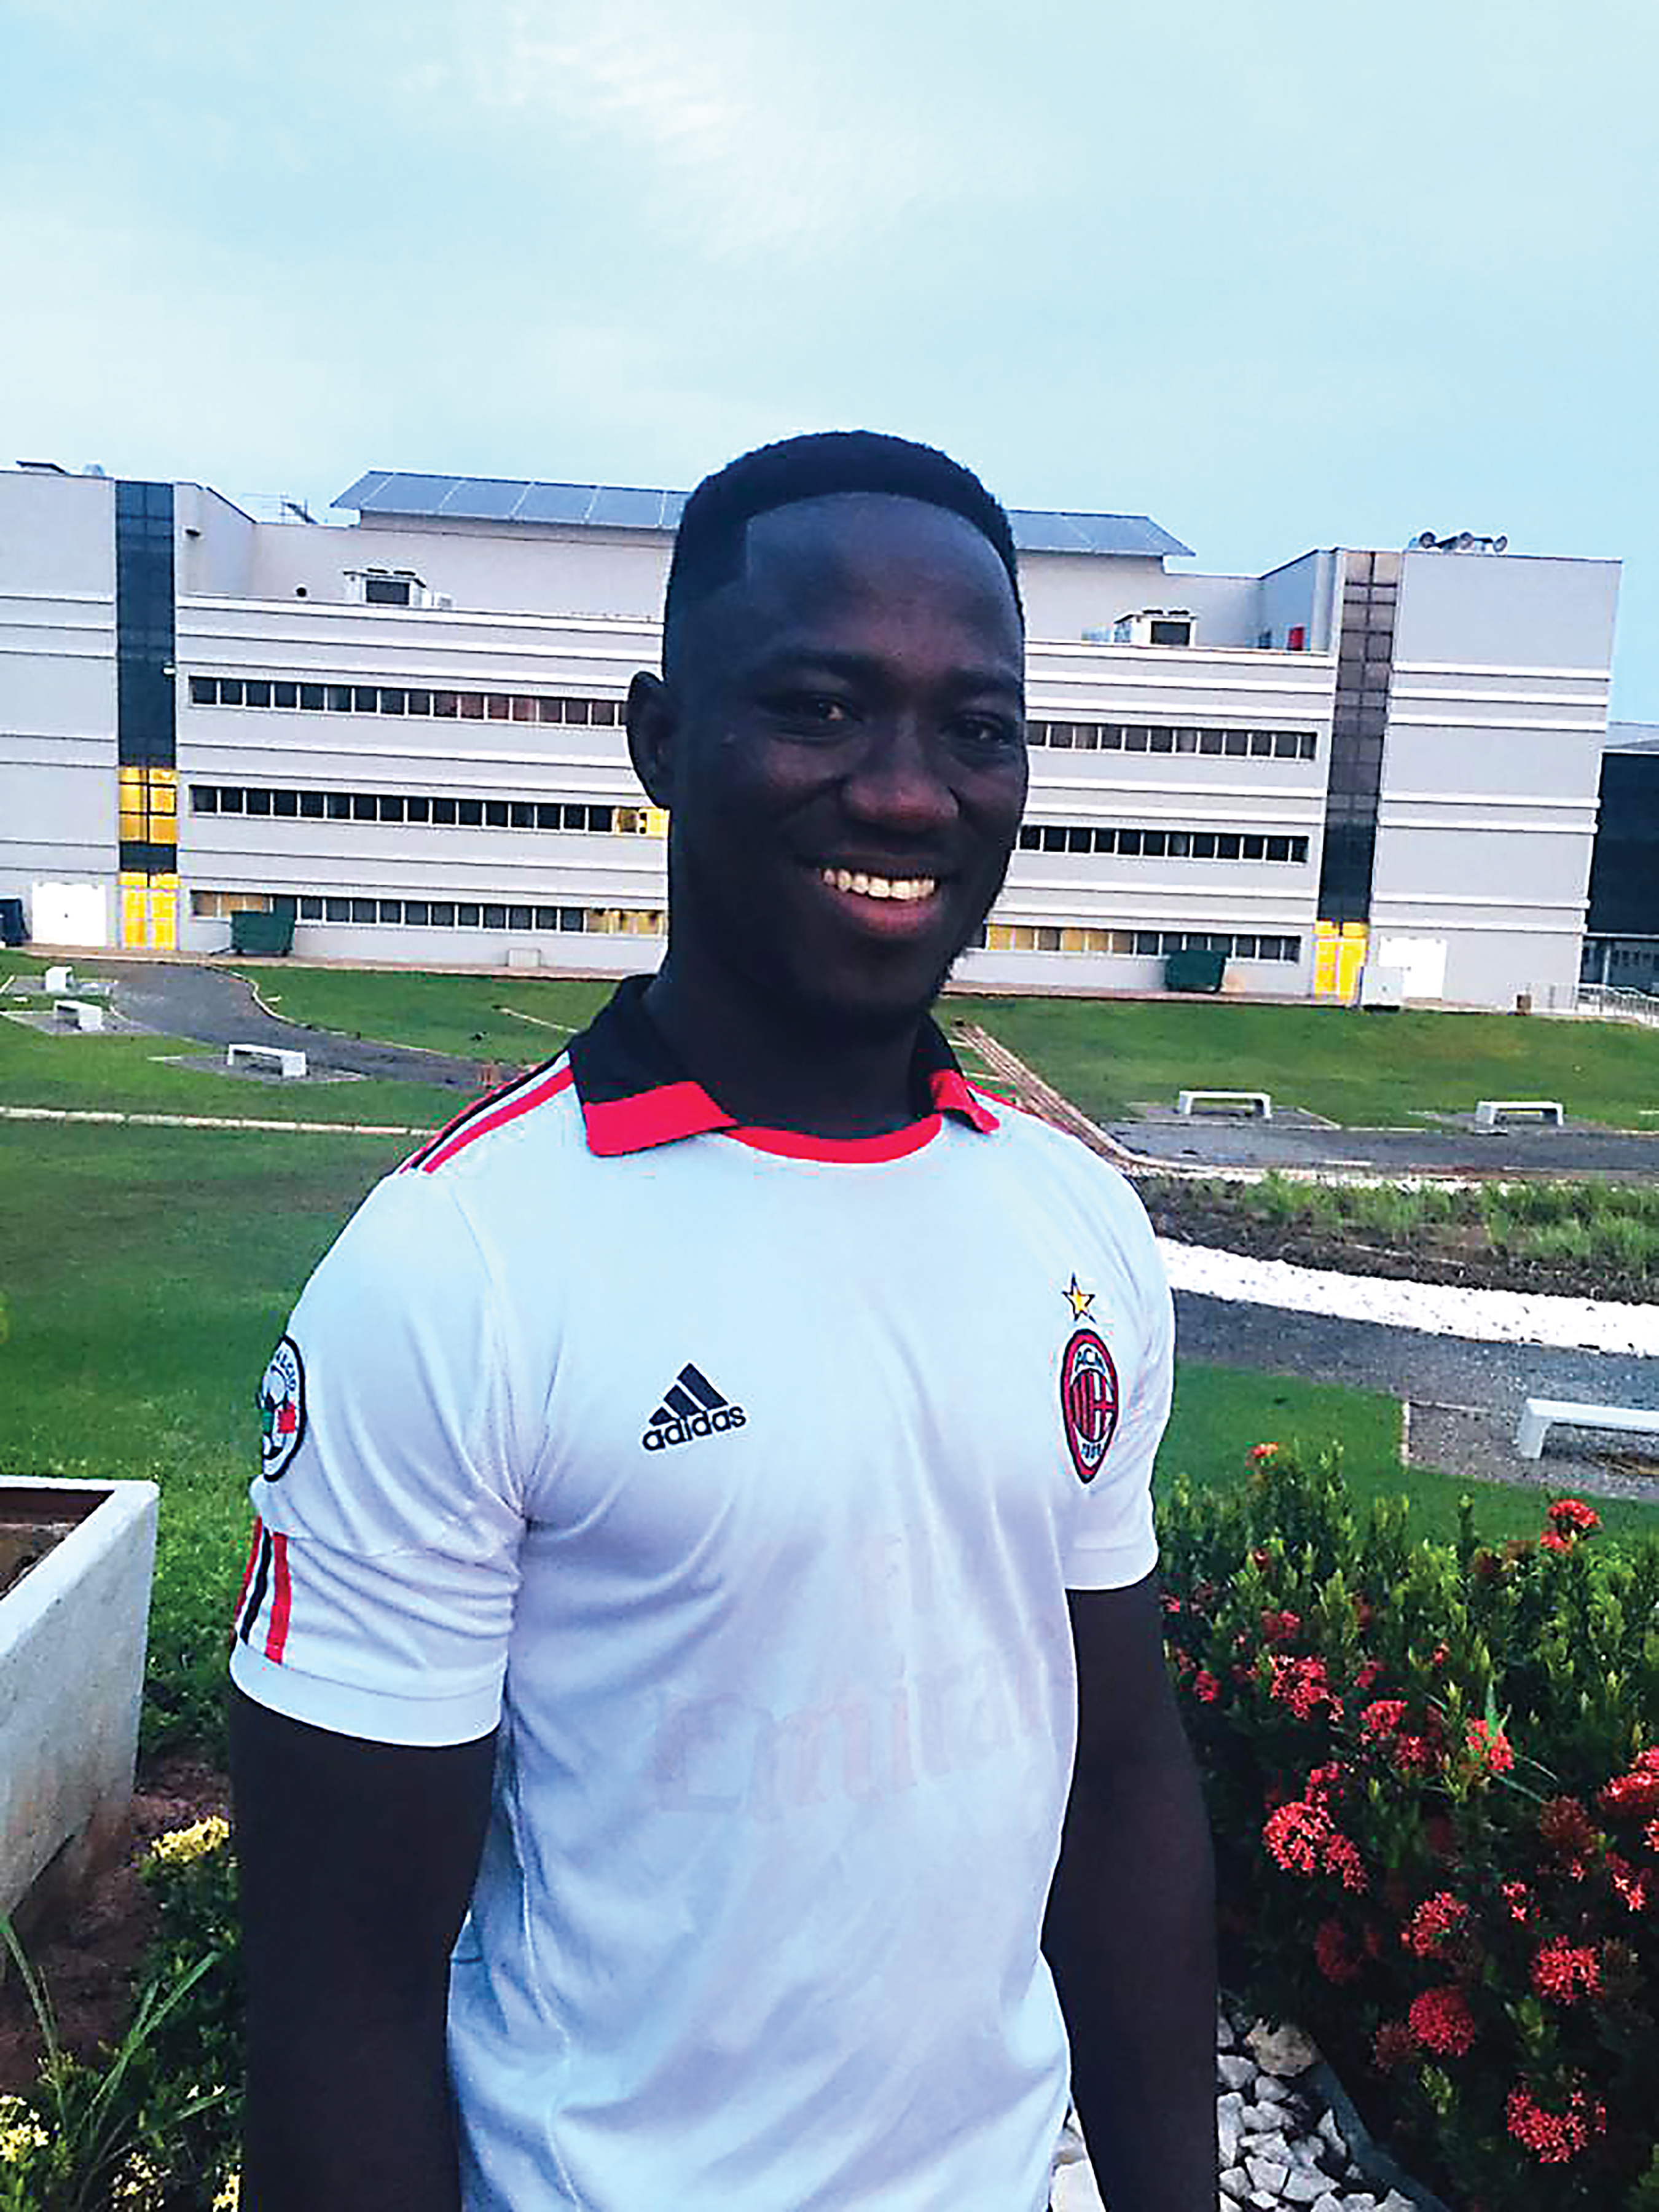  Recently Emmanuel graduated with a Bachelor’s of Education and Social Work from the University of Ghana, here he is at the campus.